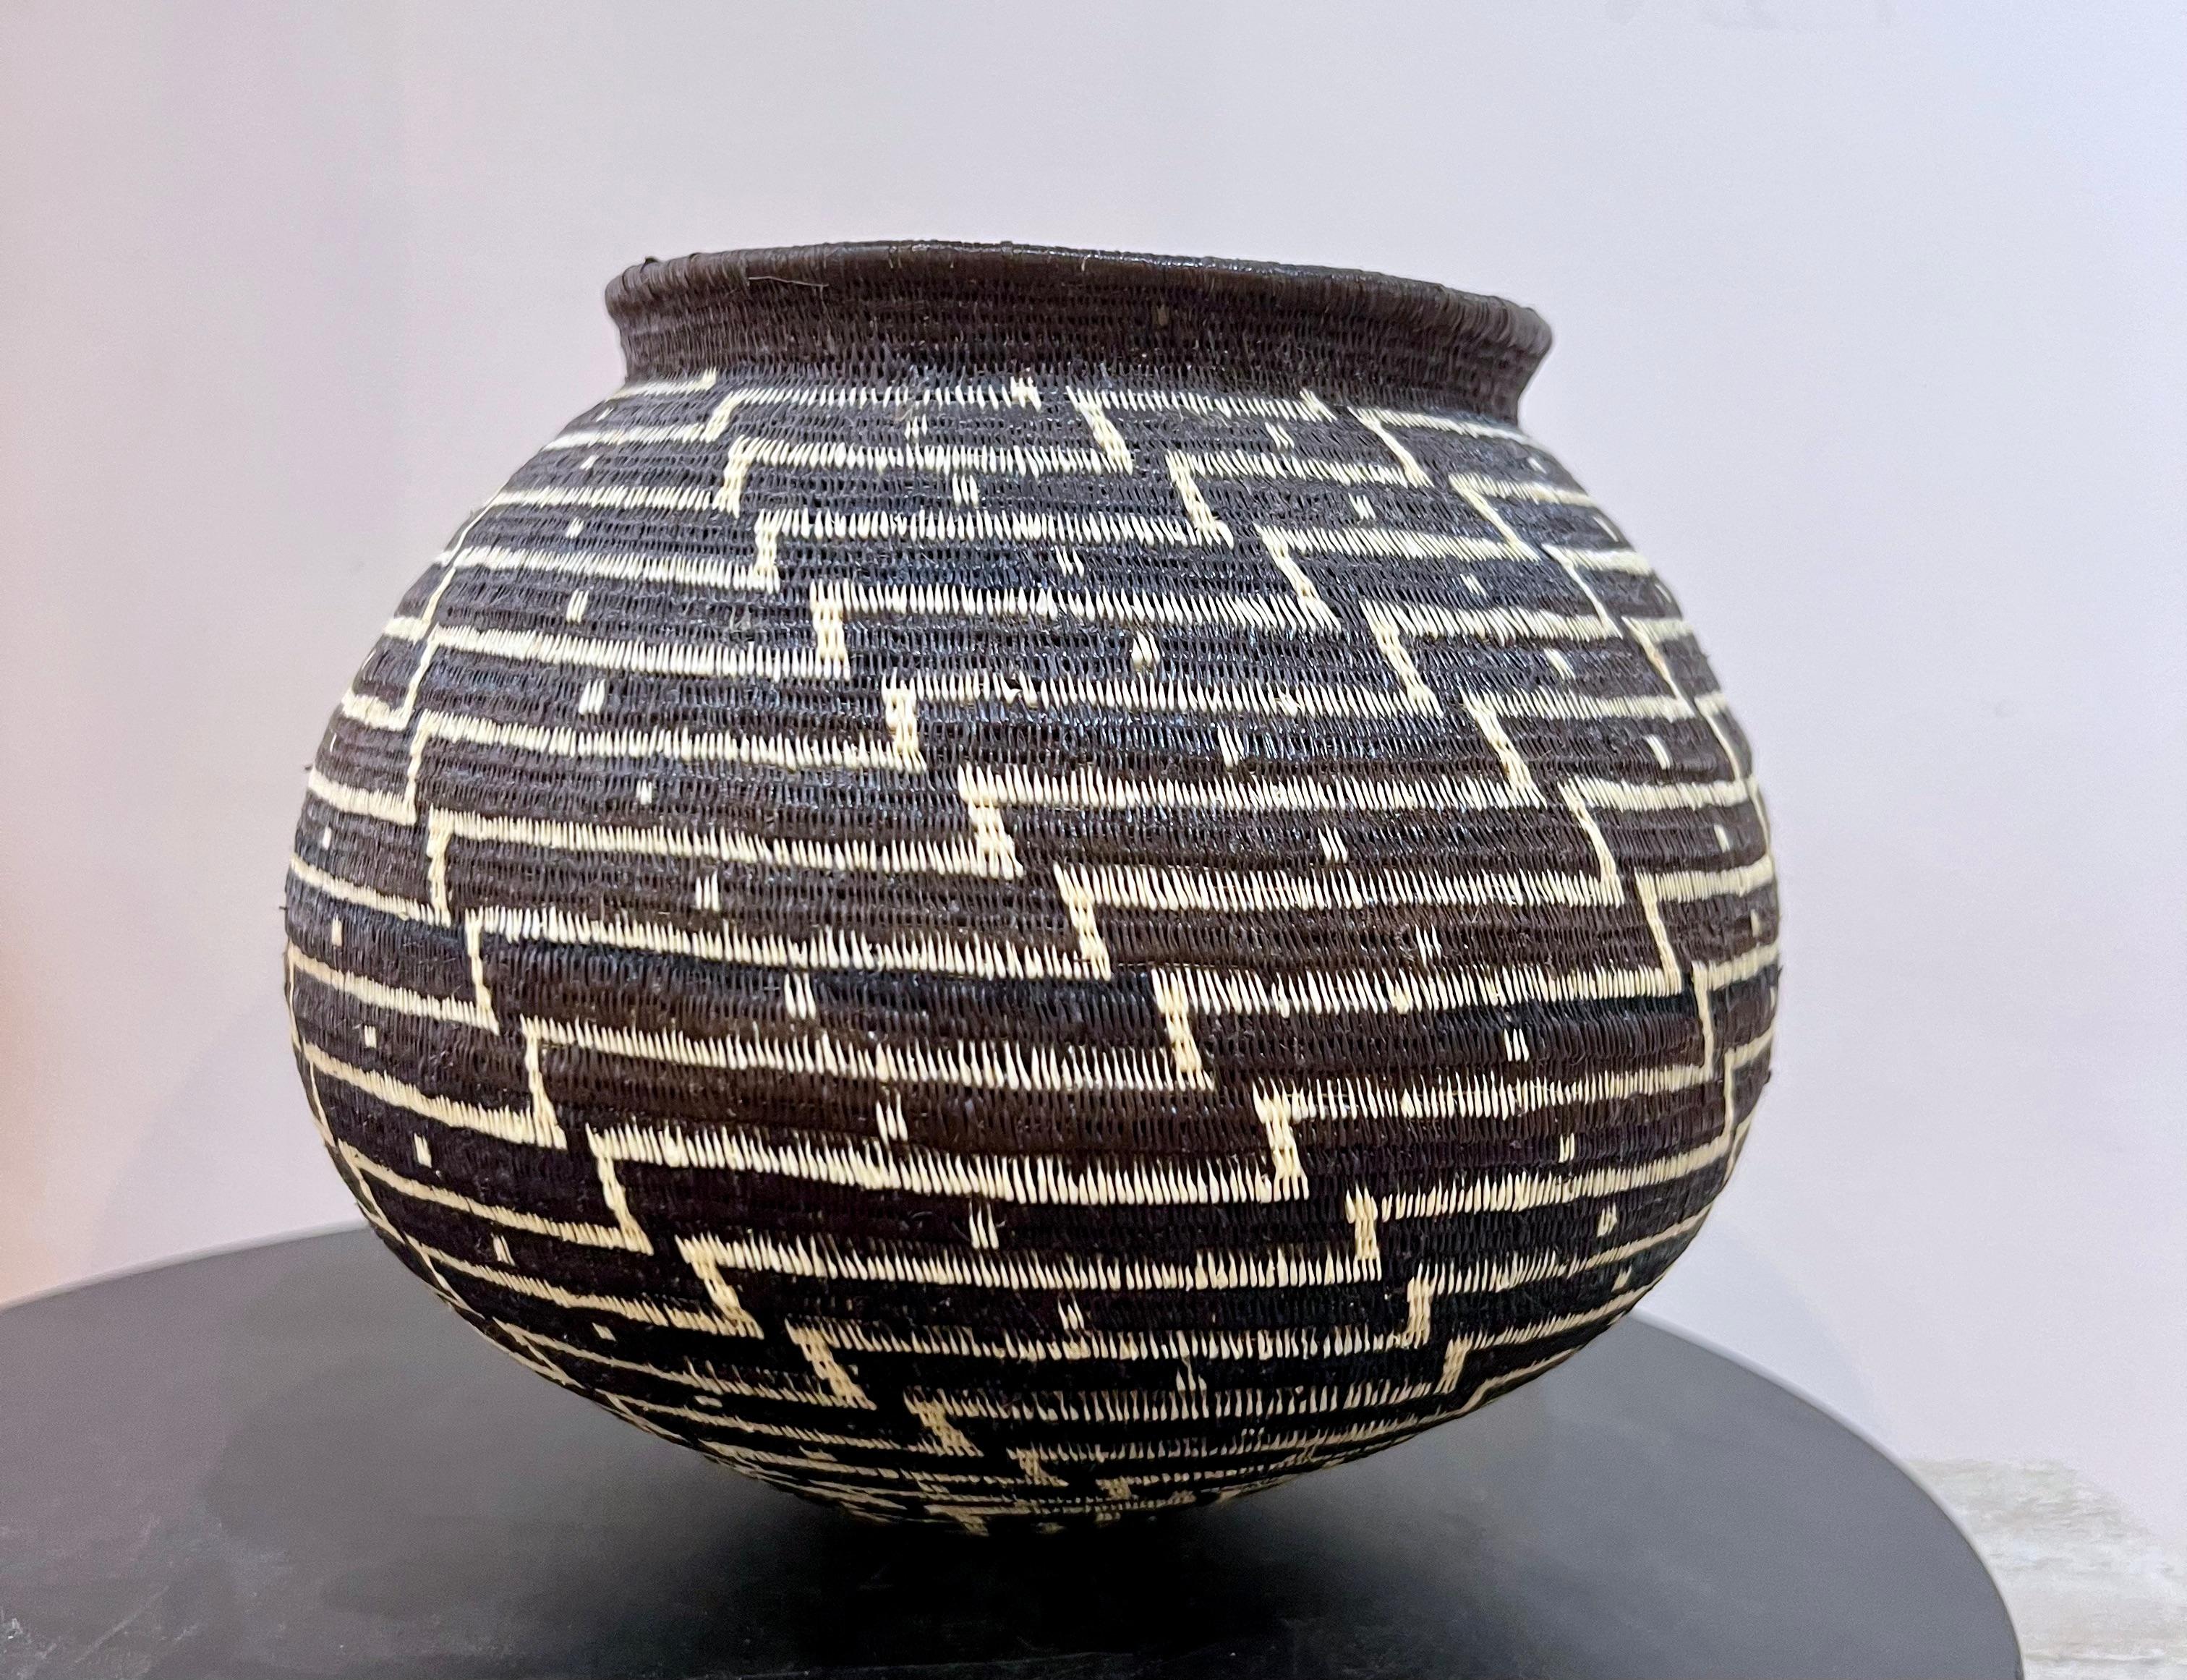 Black and White Geometric Basket, Panama, Rainforest, Wounaan Tribe, Contemporary - Mixed Media Art by Unknown